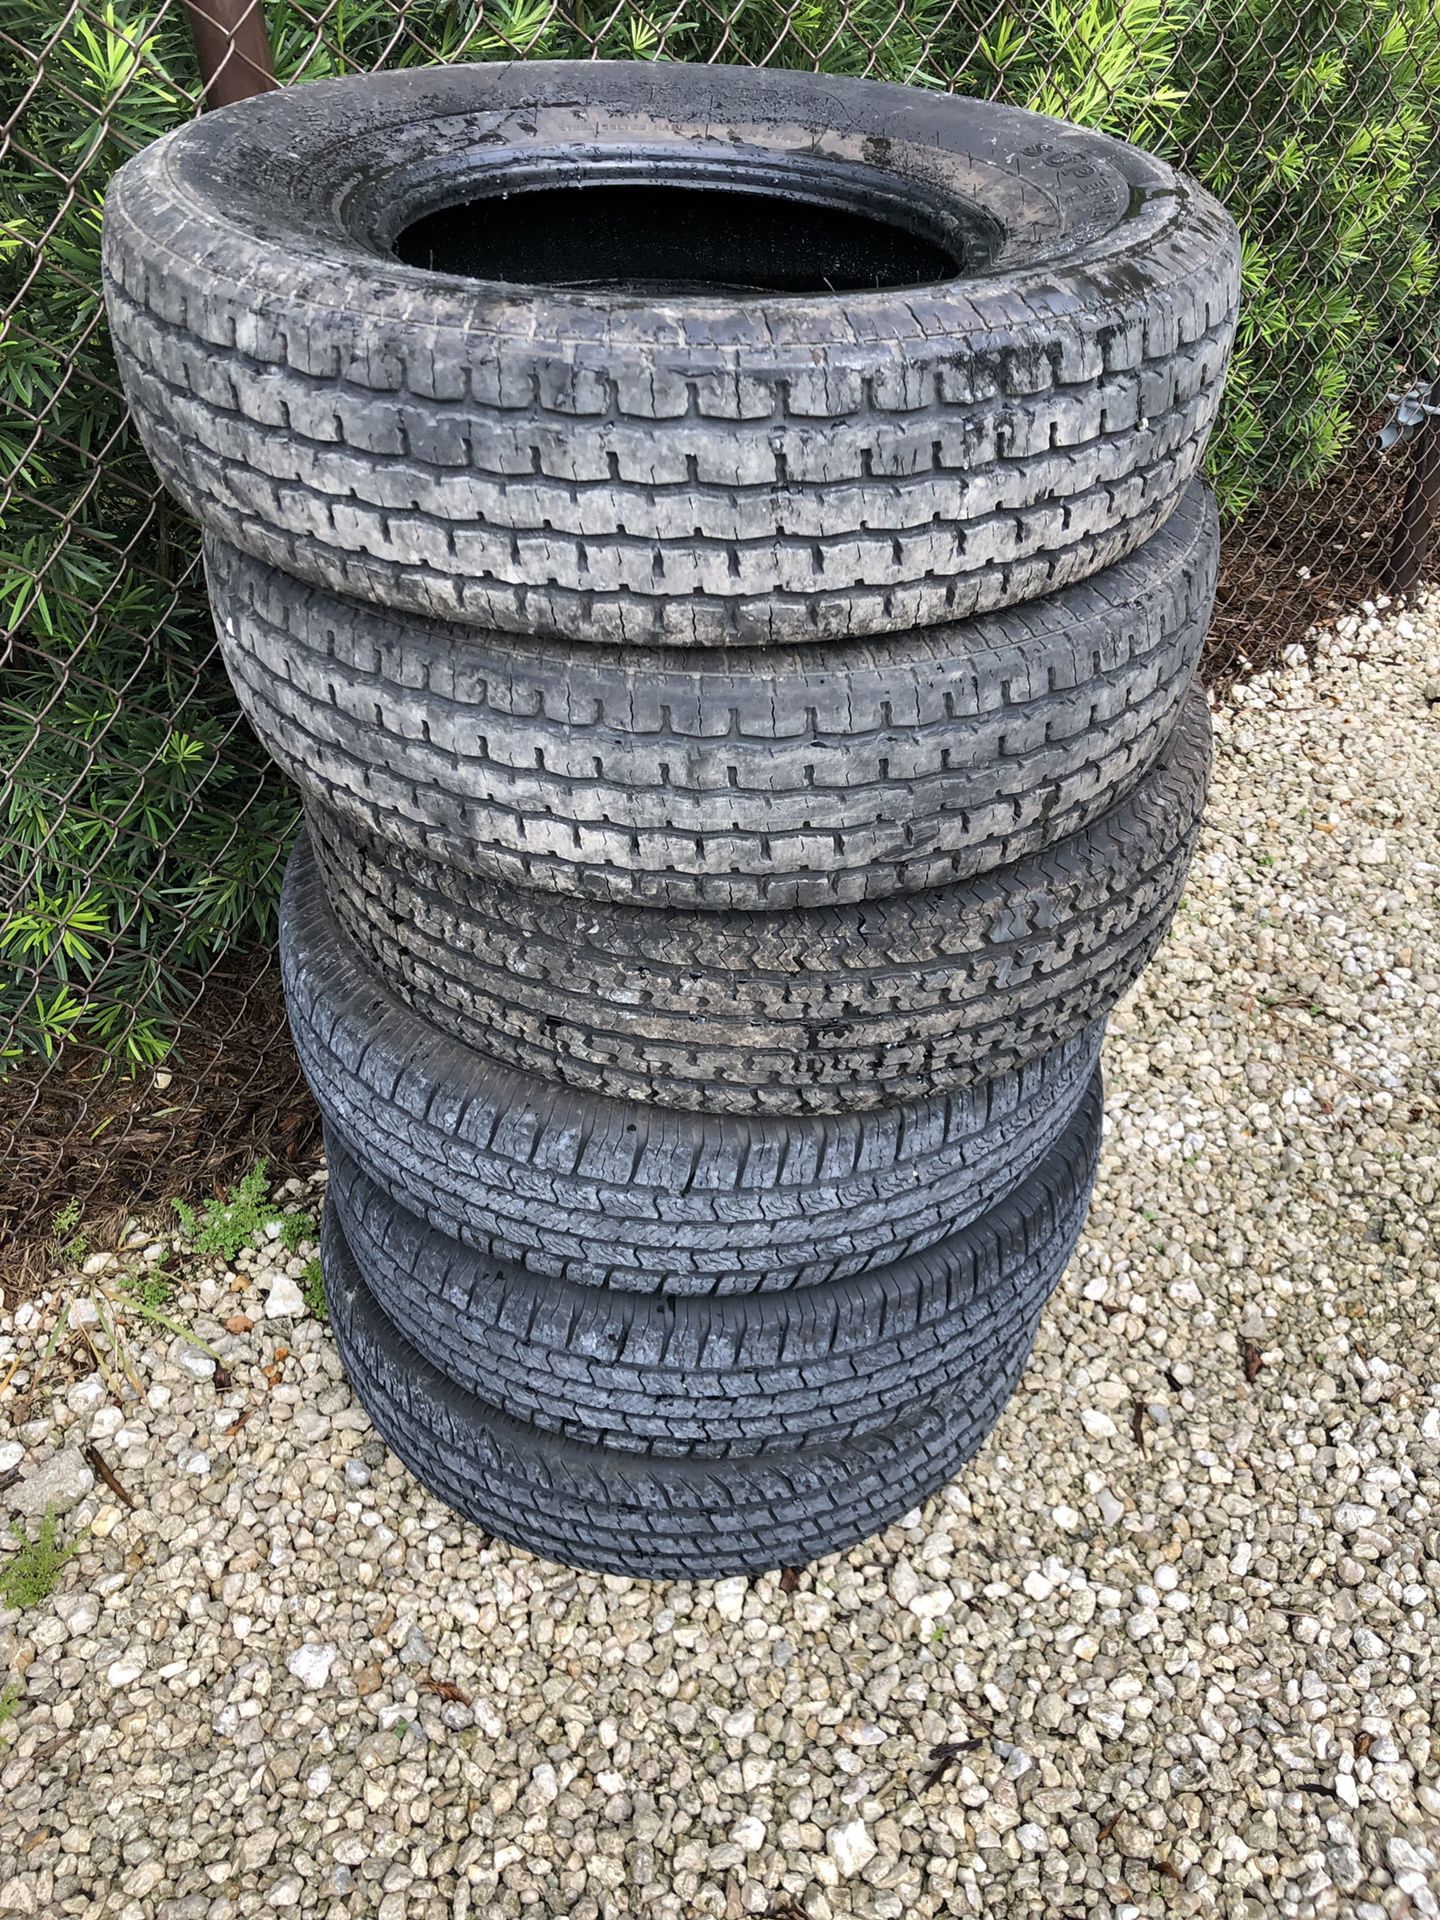 Trailer tires 235/80/16, 10 ply